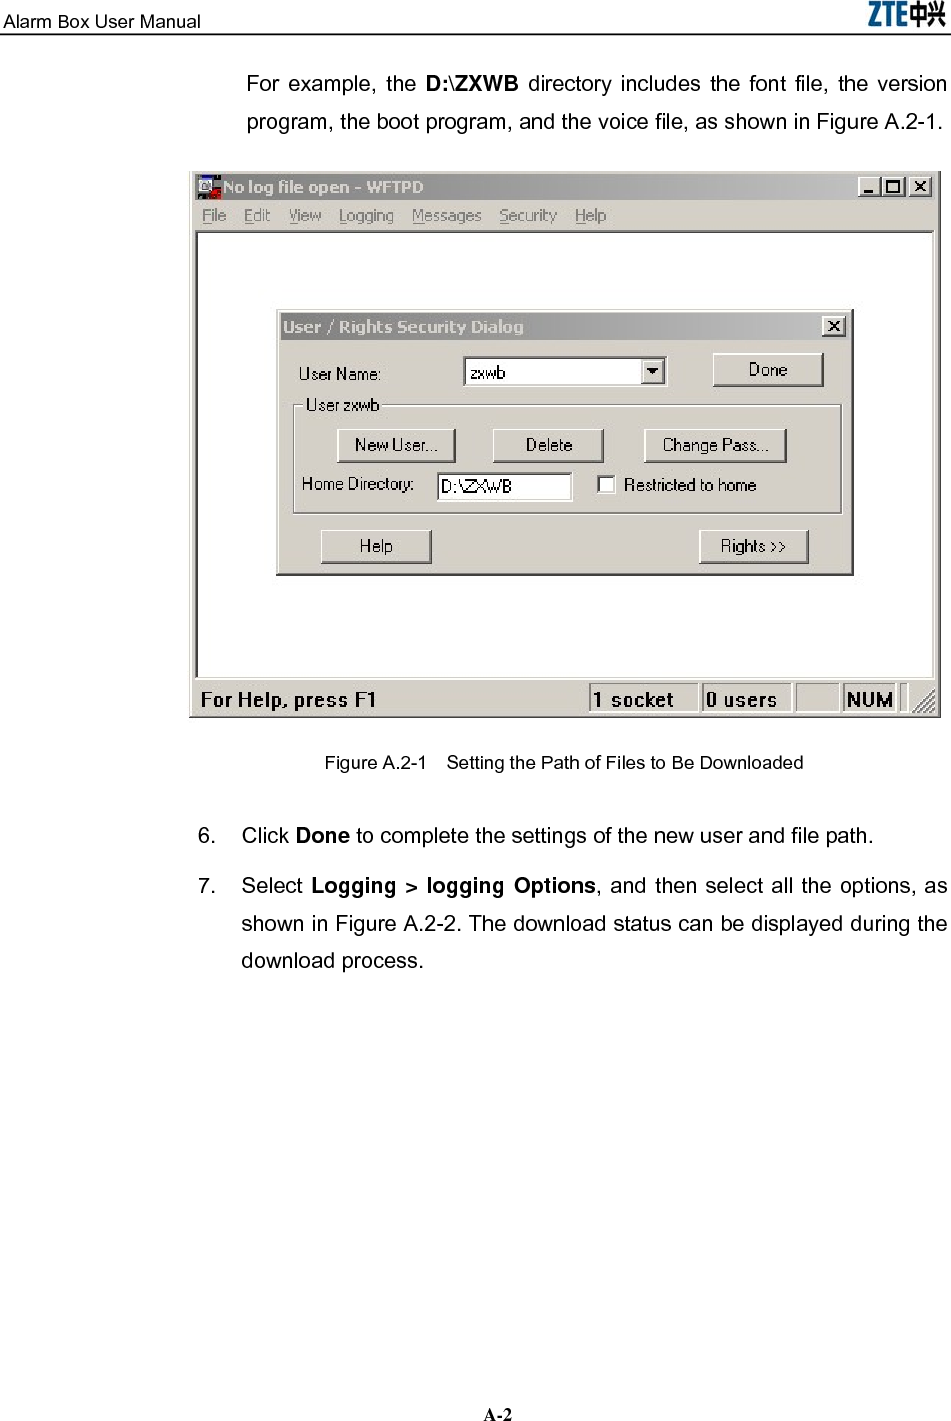 Alarm Box User Manual  A-2For example, the D:\ZXWB directory includes the font file, the version program, the boot program, and the voice file, as shown in Figure A.2-1.  Figure A.2-1    Setting the Path of Files to Be Downloaded 6. Click Done to complete the settings of the new user and file path. 7. Select Logging &gt; logging Options, and then select all the options, as shown in Figure A.2-2. The download status can be displayed during the download process. 